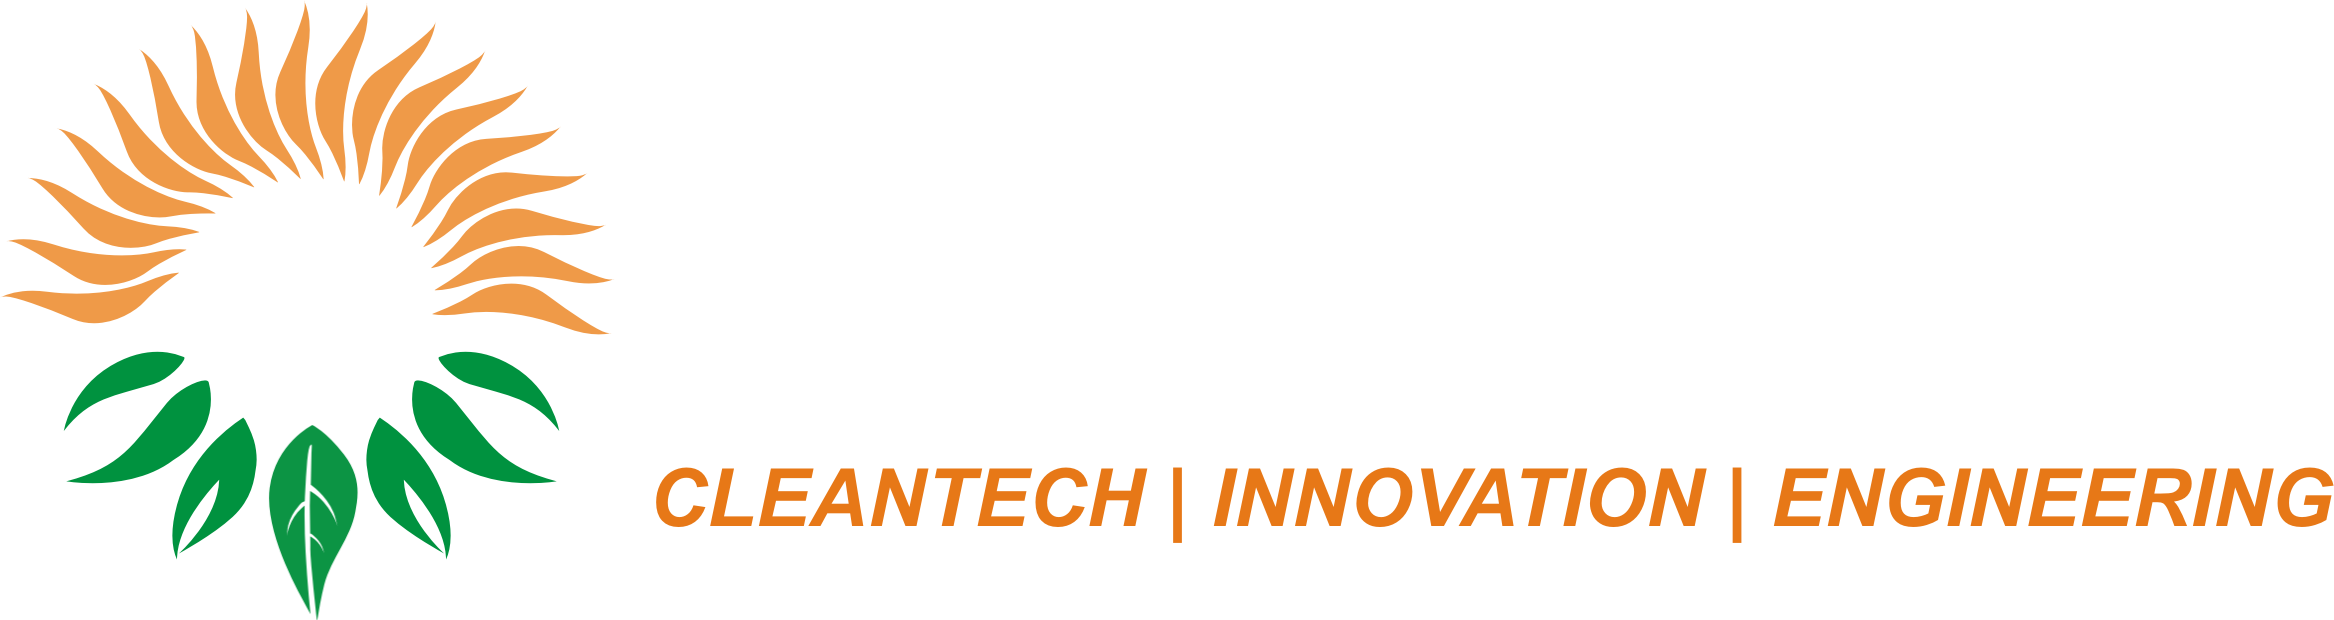 Organic Recycling Systems IPO Logo